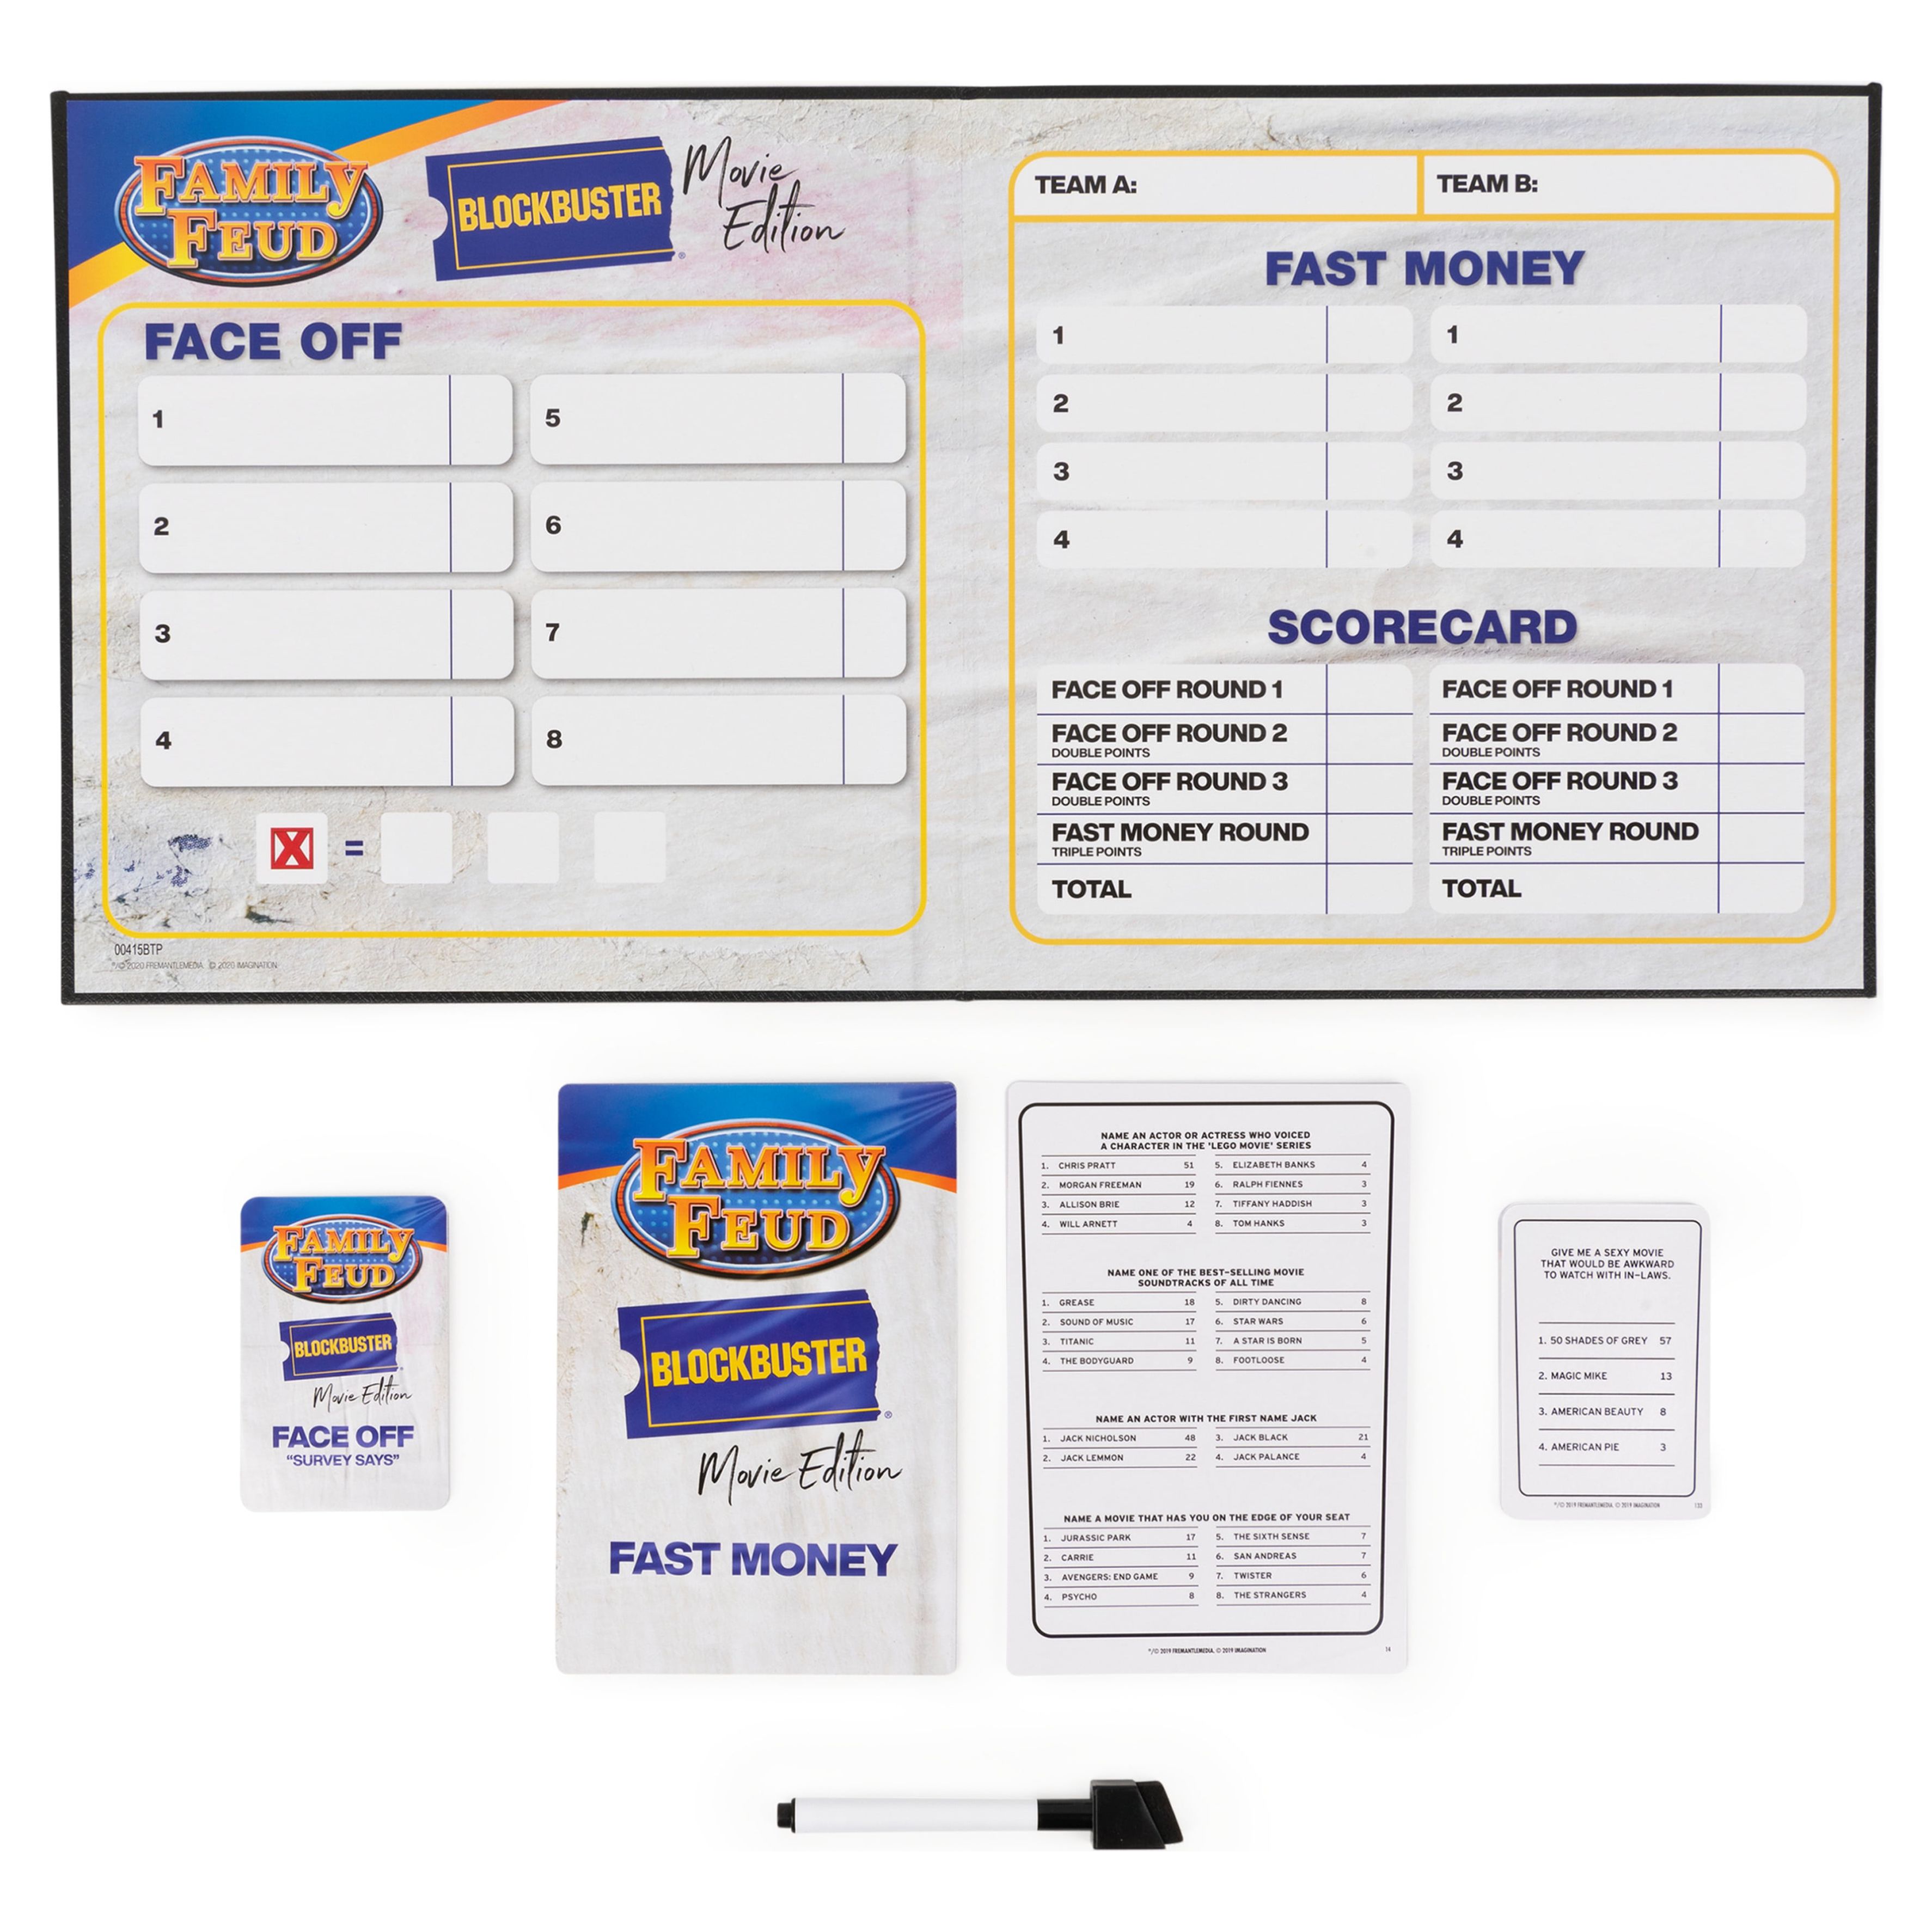 Family Feud Blockbuster Edition, Movie Trivia Survey Showdown Board Game for Ages 12 & up - image 2 of 6